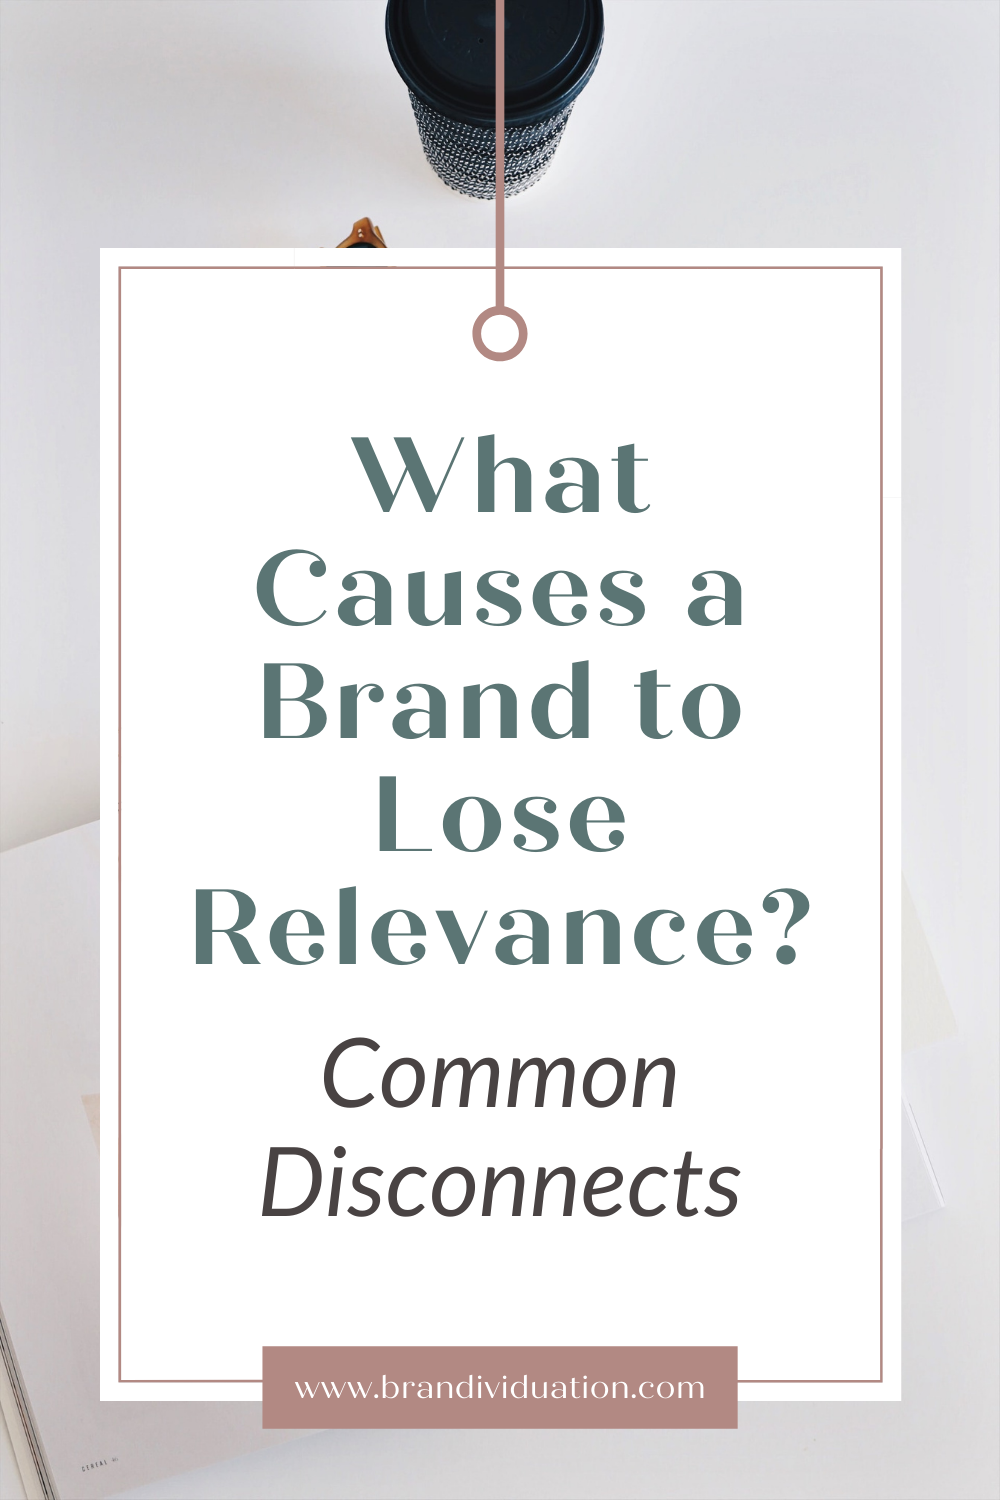 What Causes a Brand to Lose Relevance? Common Disconnects